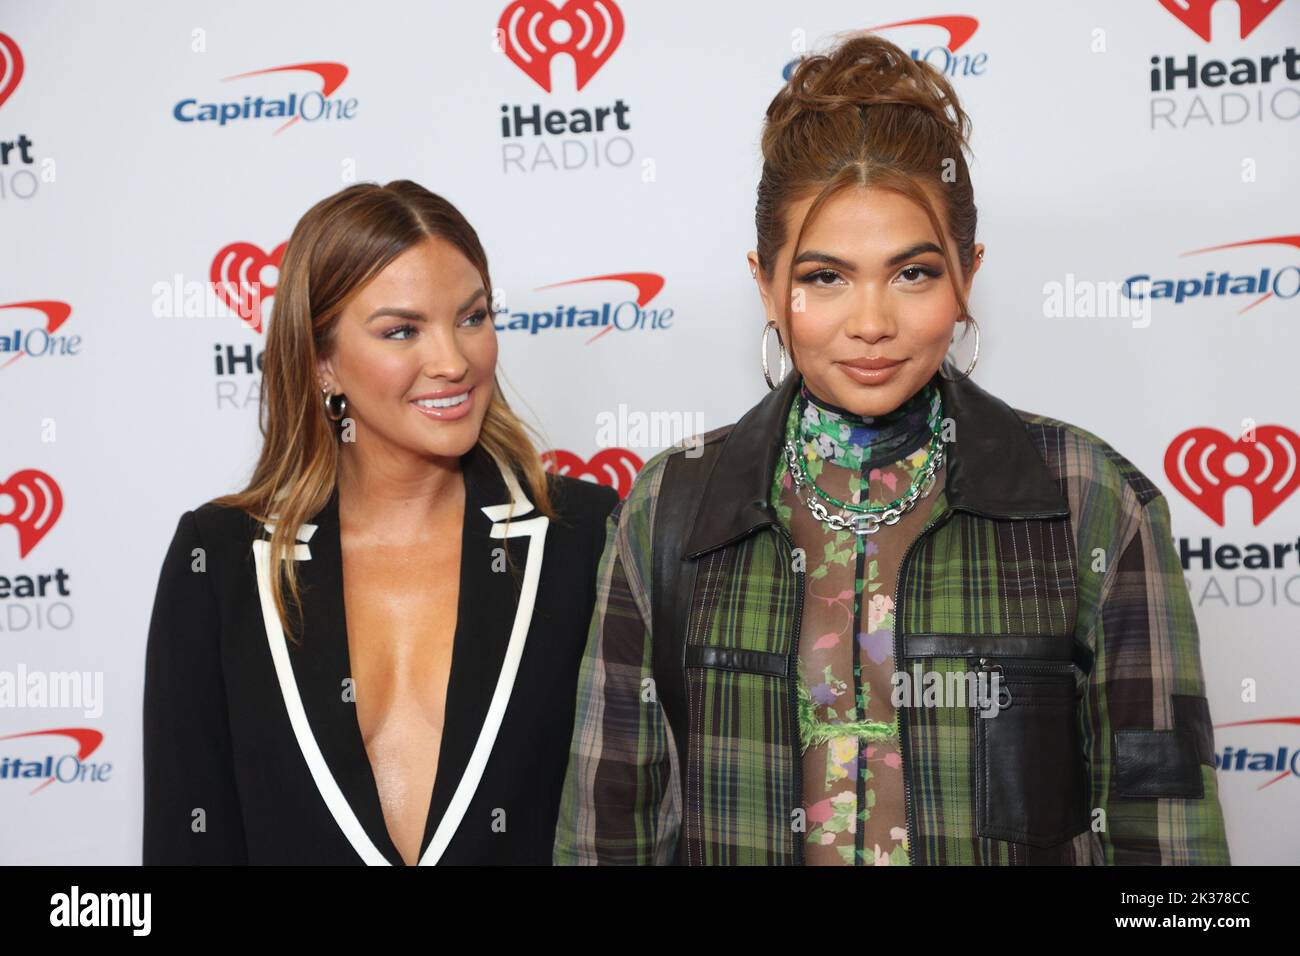 Las Vegas, United States. 24th Sep, 2022. Becca Tilley and Hayley Kiyoko arrive for the iHeartRadio Music Festival at T-Mobile Arena in Las Vegas, Nevada on Saturday, September 24, 2022. Photo by James Atoa/UPI Credit: UPI/Alamy Live News Stock Photo